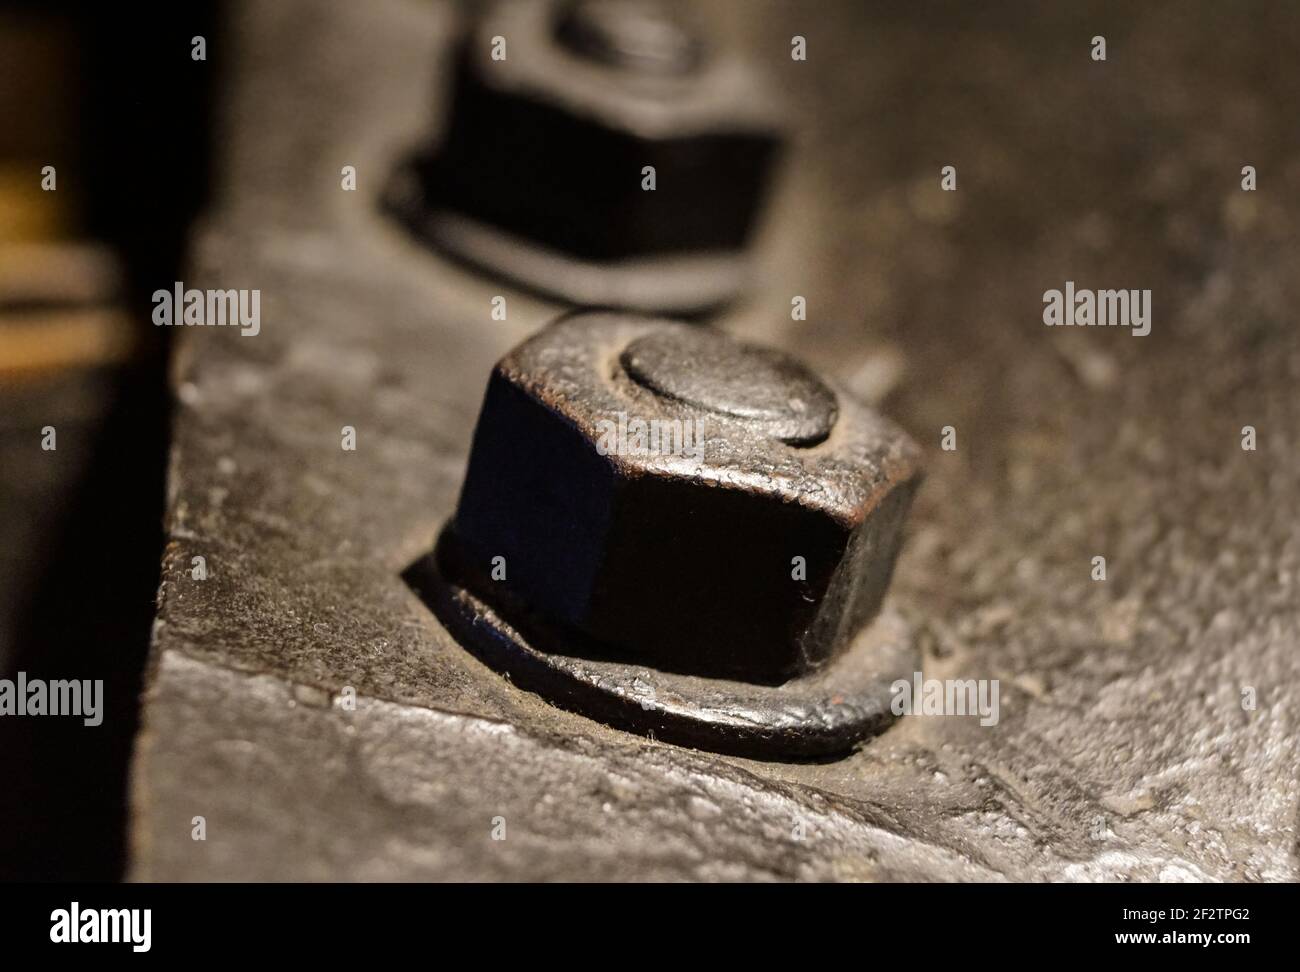 Nut and bolt close up with shallow Dof Stock Photo